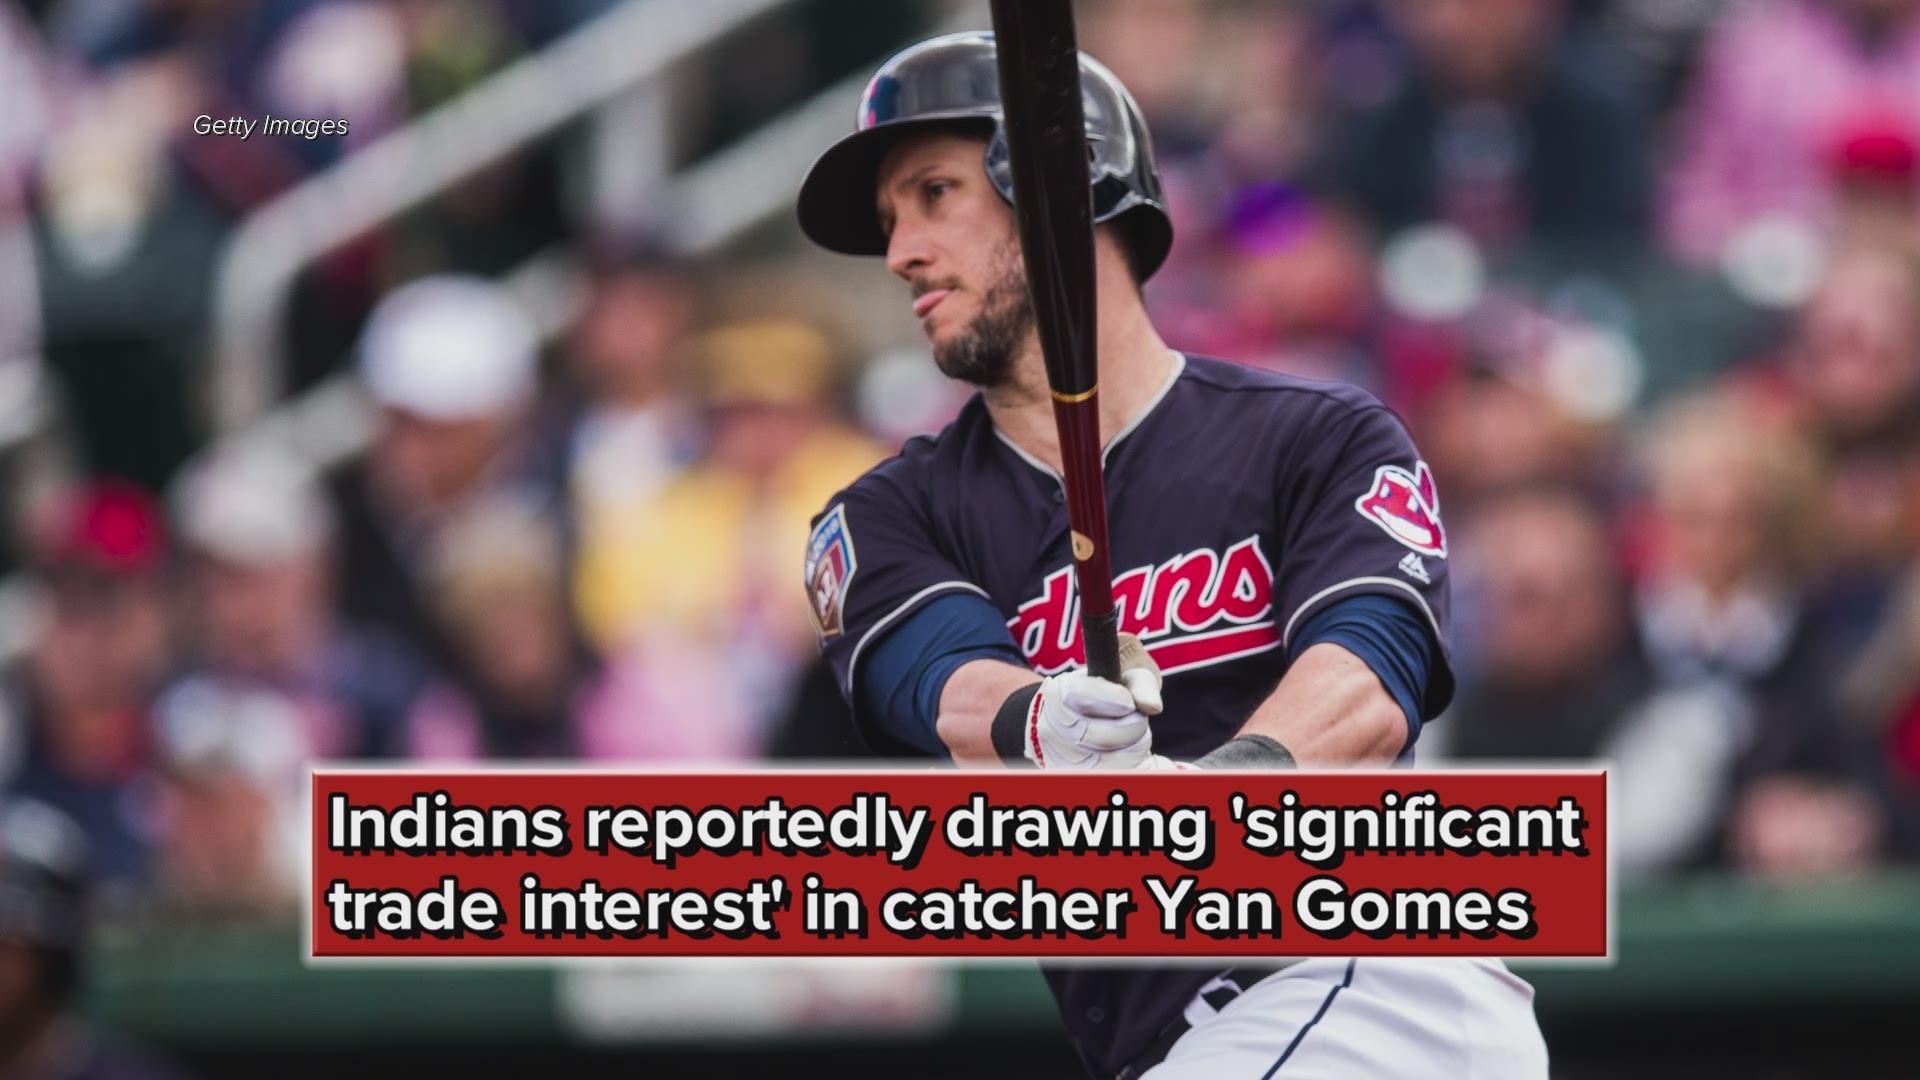 REPORT: Cleveland Indians drawing 'significant trade interest' in Yan Gomes